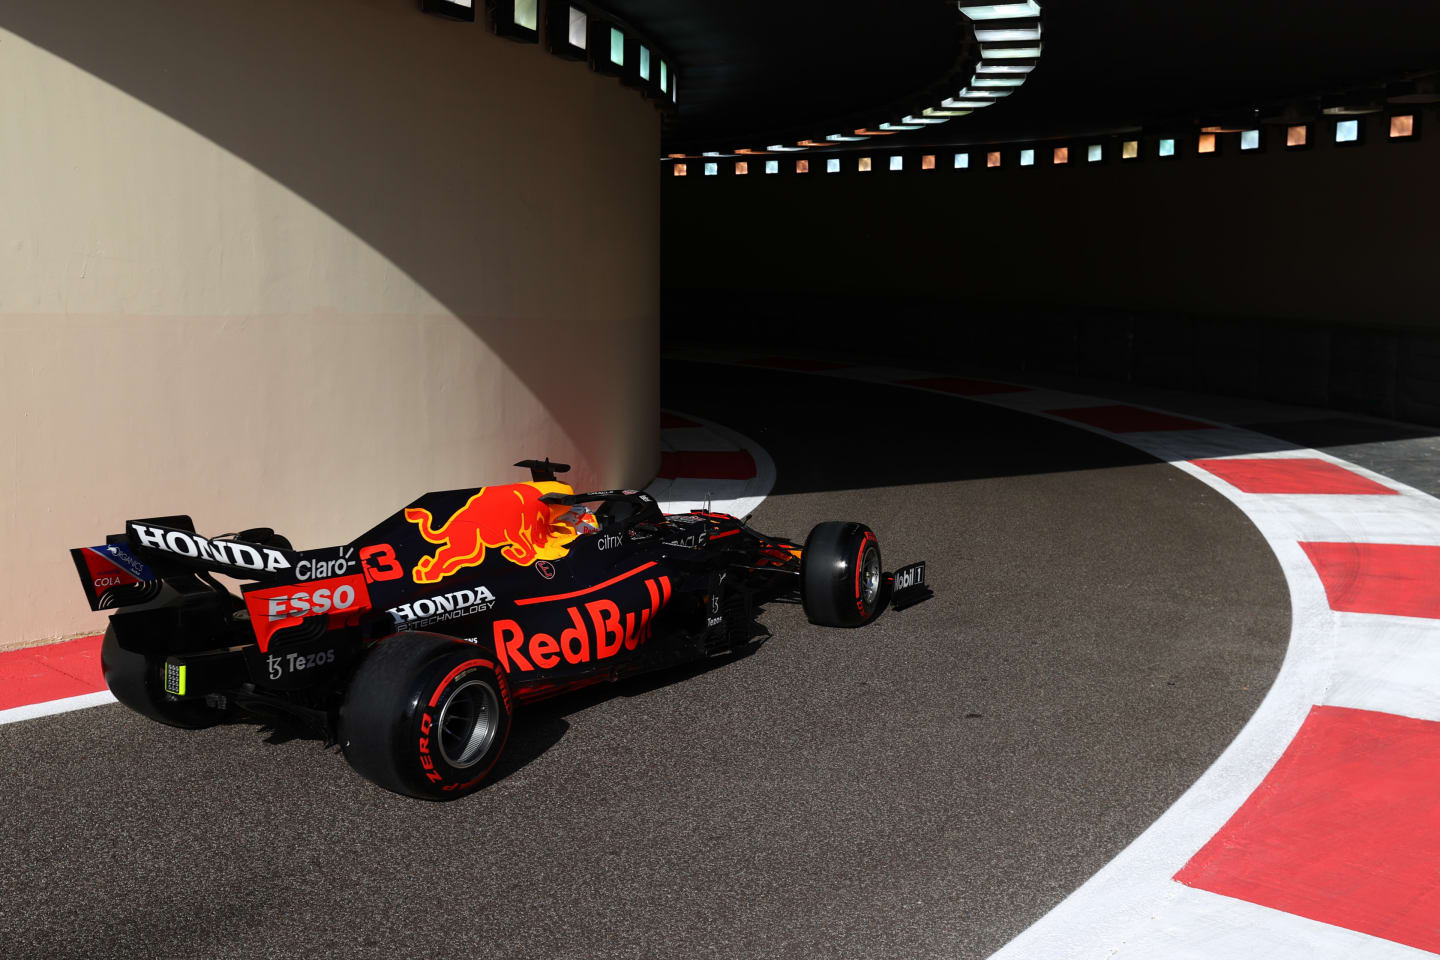 ABU DHABI, UNITED ARAB EMIRATES - DECEMBER 10: Max Verstappen of the Netherlands driving the (33) Red Bull Racing RB16B Honda during practice ahead of the F1 Grand Prix of Abu Dhabi at Yas Marina Circuit on December 10, 2021 in Abu Dhabi, United Arab Emirates. (Photo by Clive Rose/Getty Images)